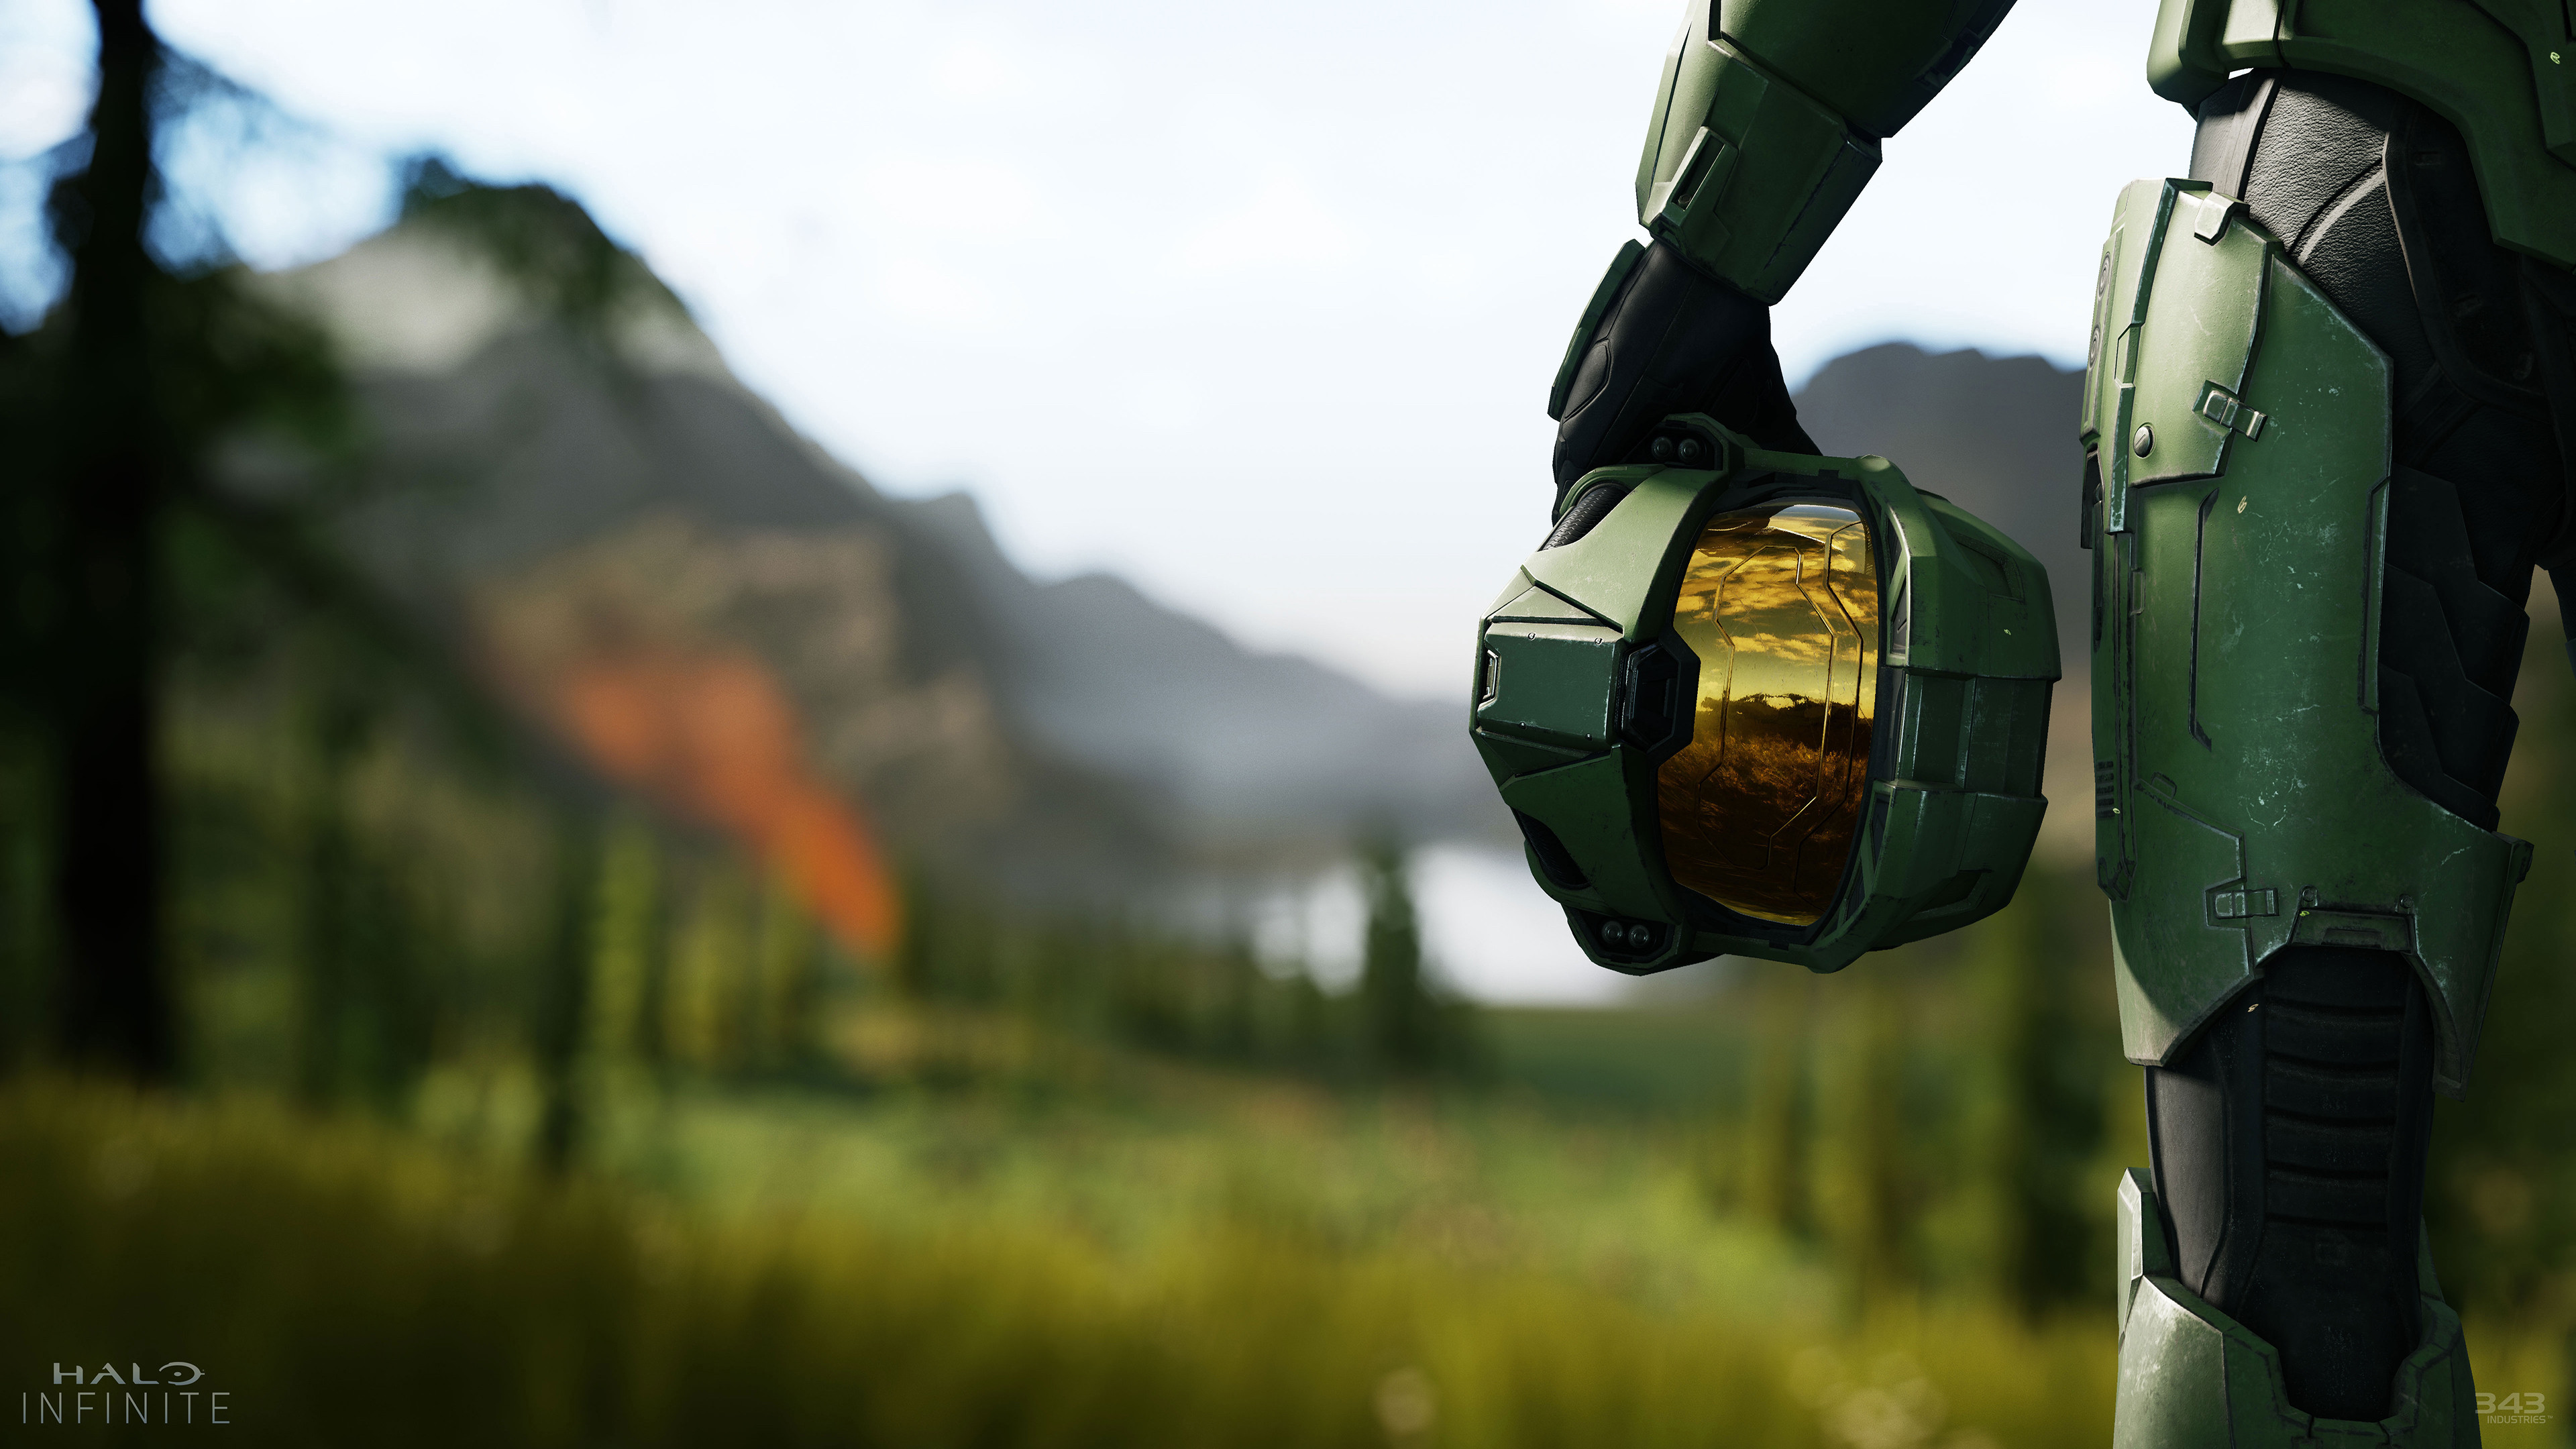 New features announced for Halo Infinite